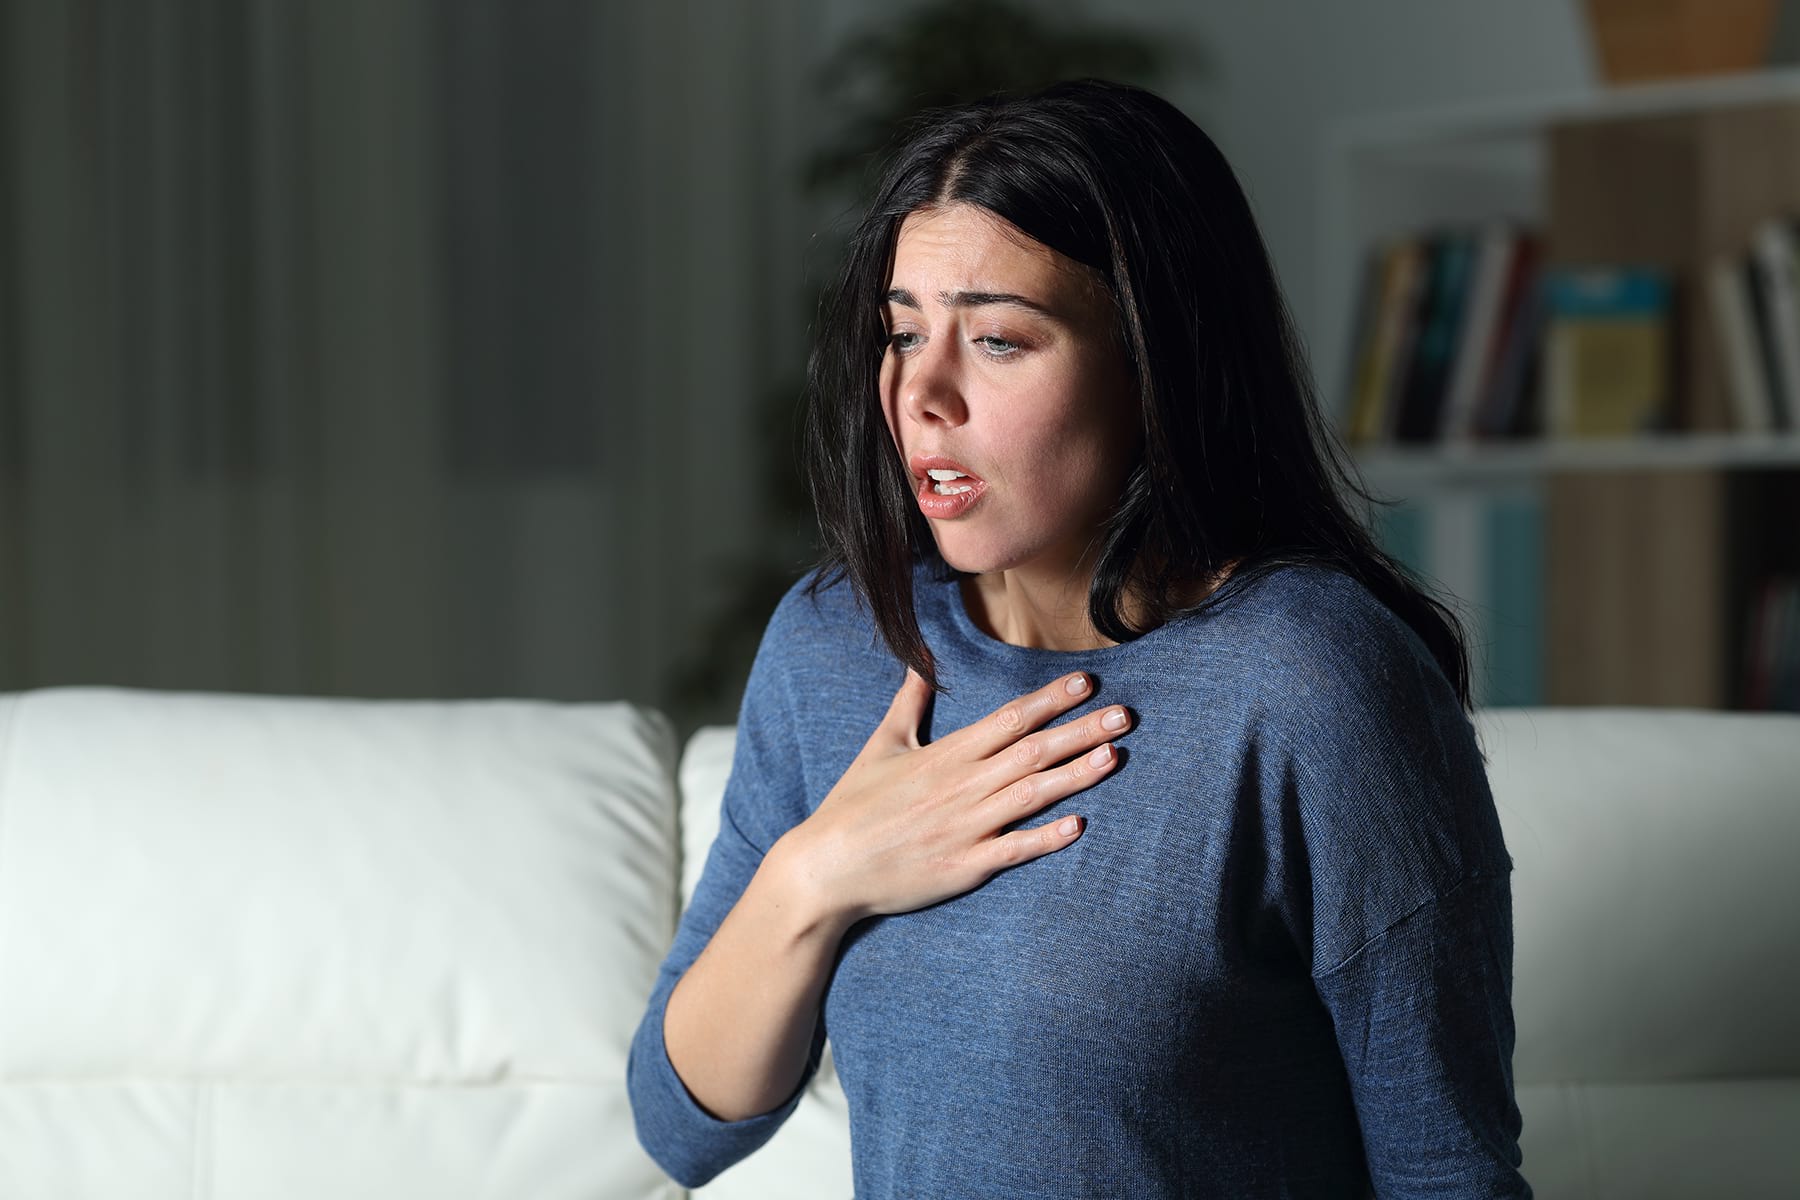 Woman sitting on couch with hand on her chest suffering from an Anxiety attack.